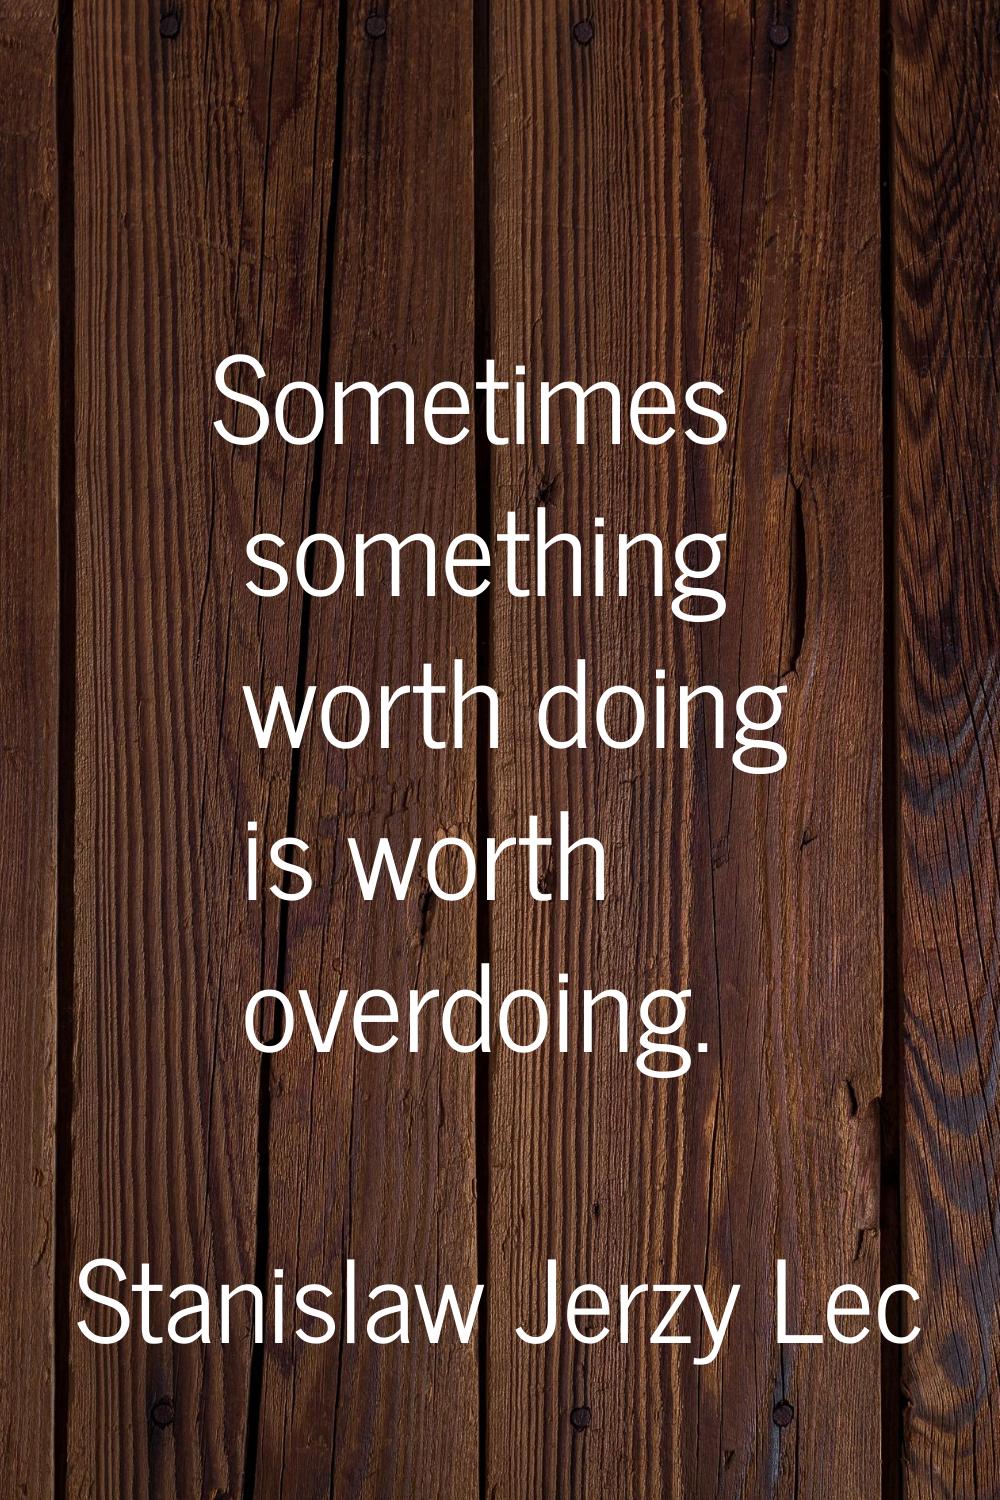 Sometimes something worth doing is worth overdoing.